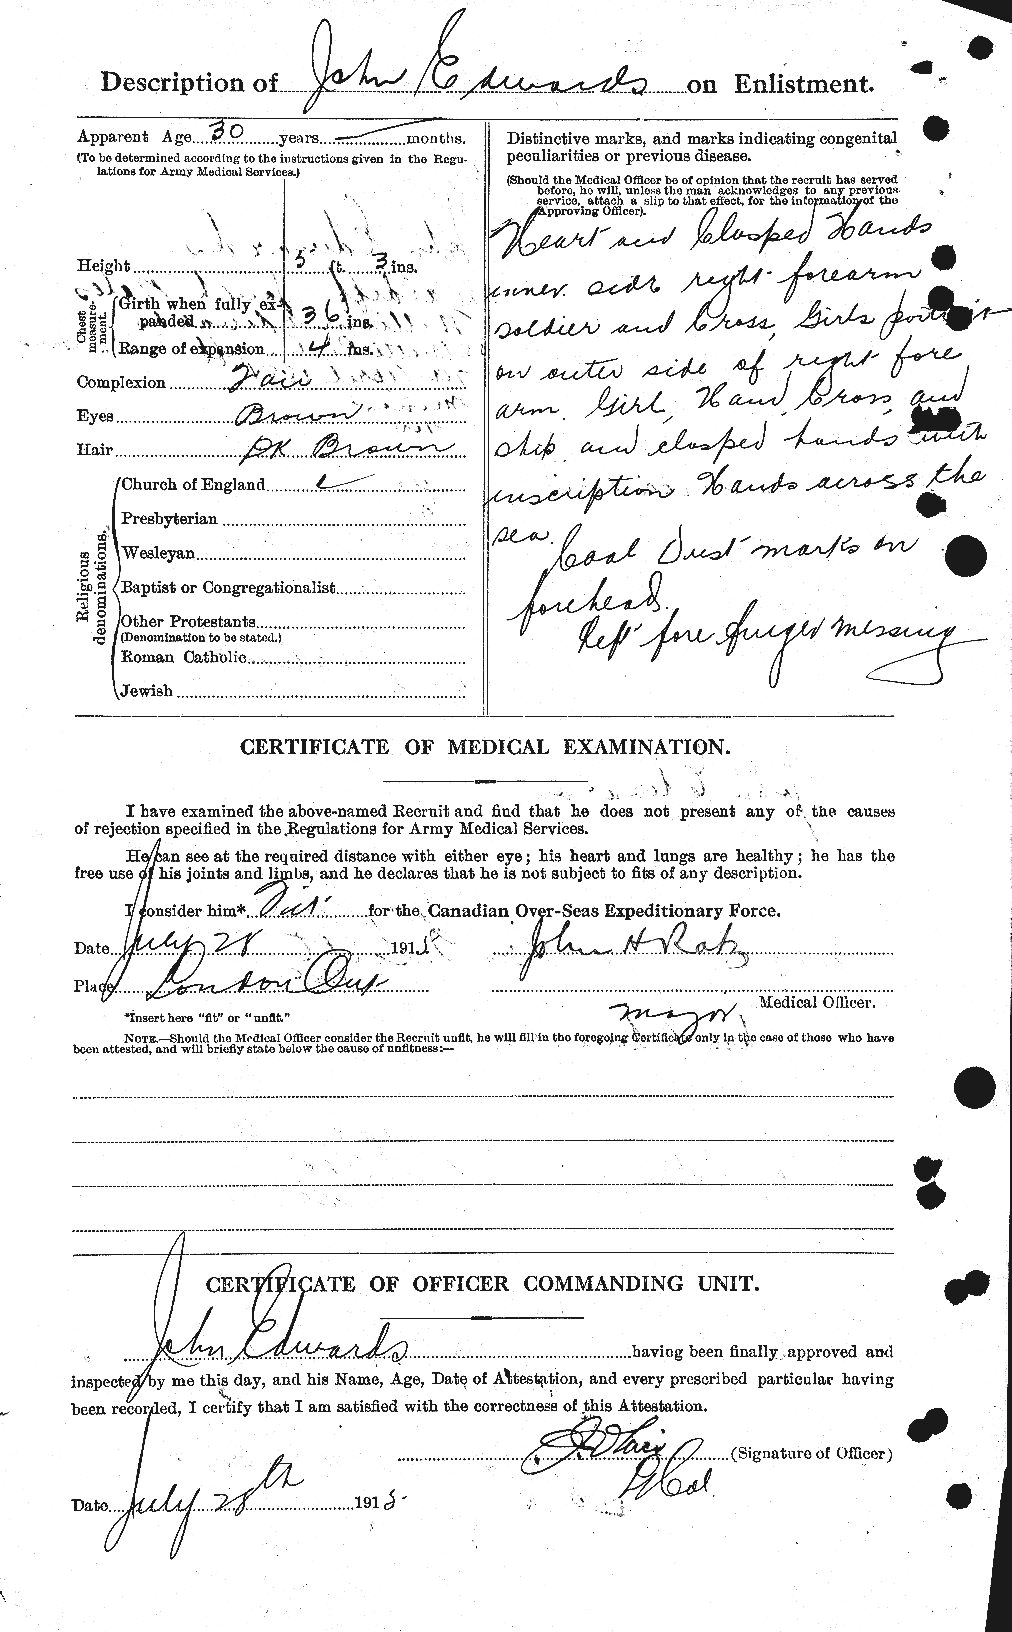 Personnel Records of the First World War - CEF 309842b